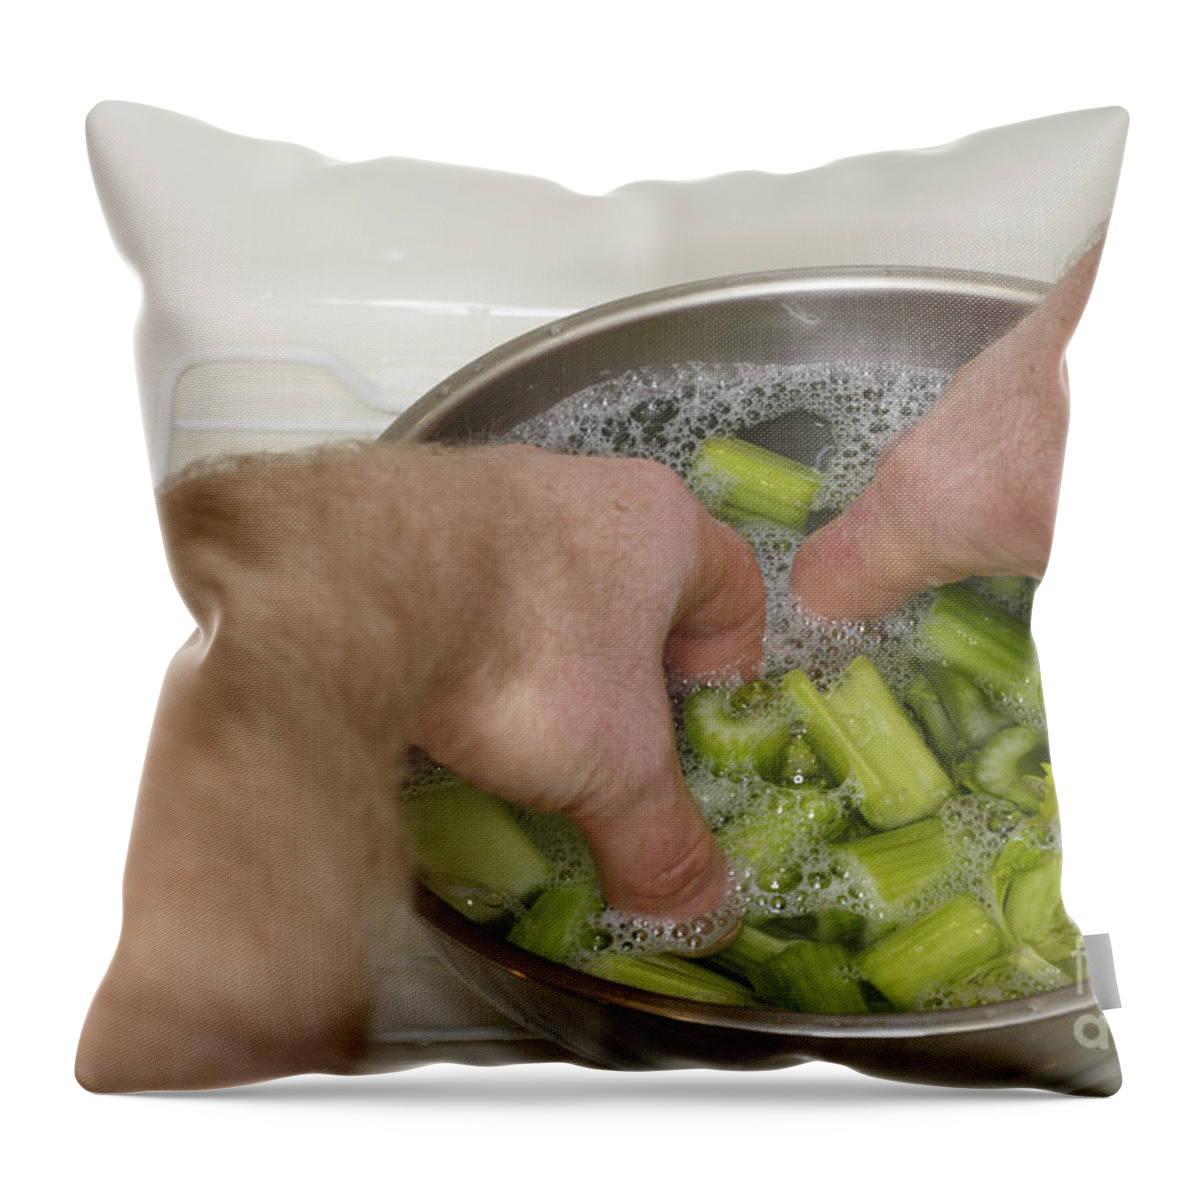 Celery Throw Pillow featuring the photograph Cleaning Celery by Lee Serenethos